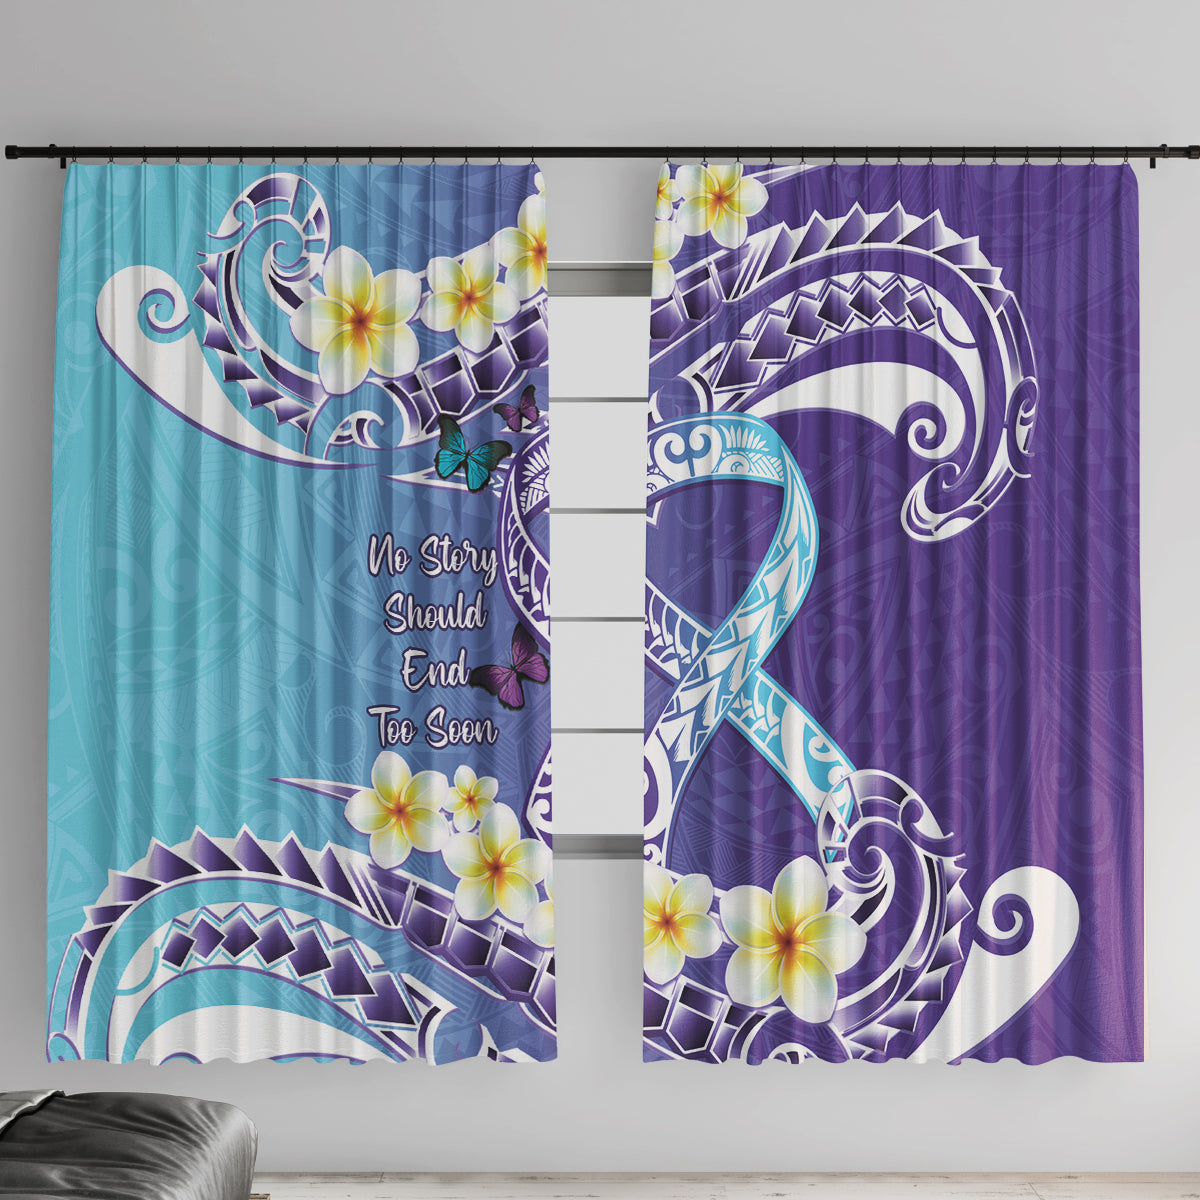 No Story Should End Too Soon Suicide Awareness Window Curtain Purple And Teal Polynesian Ribbon